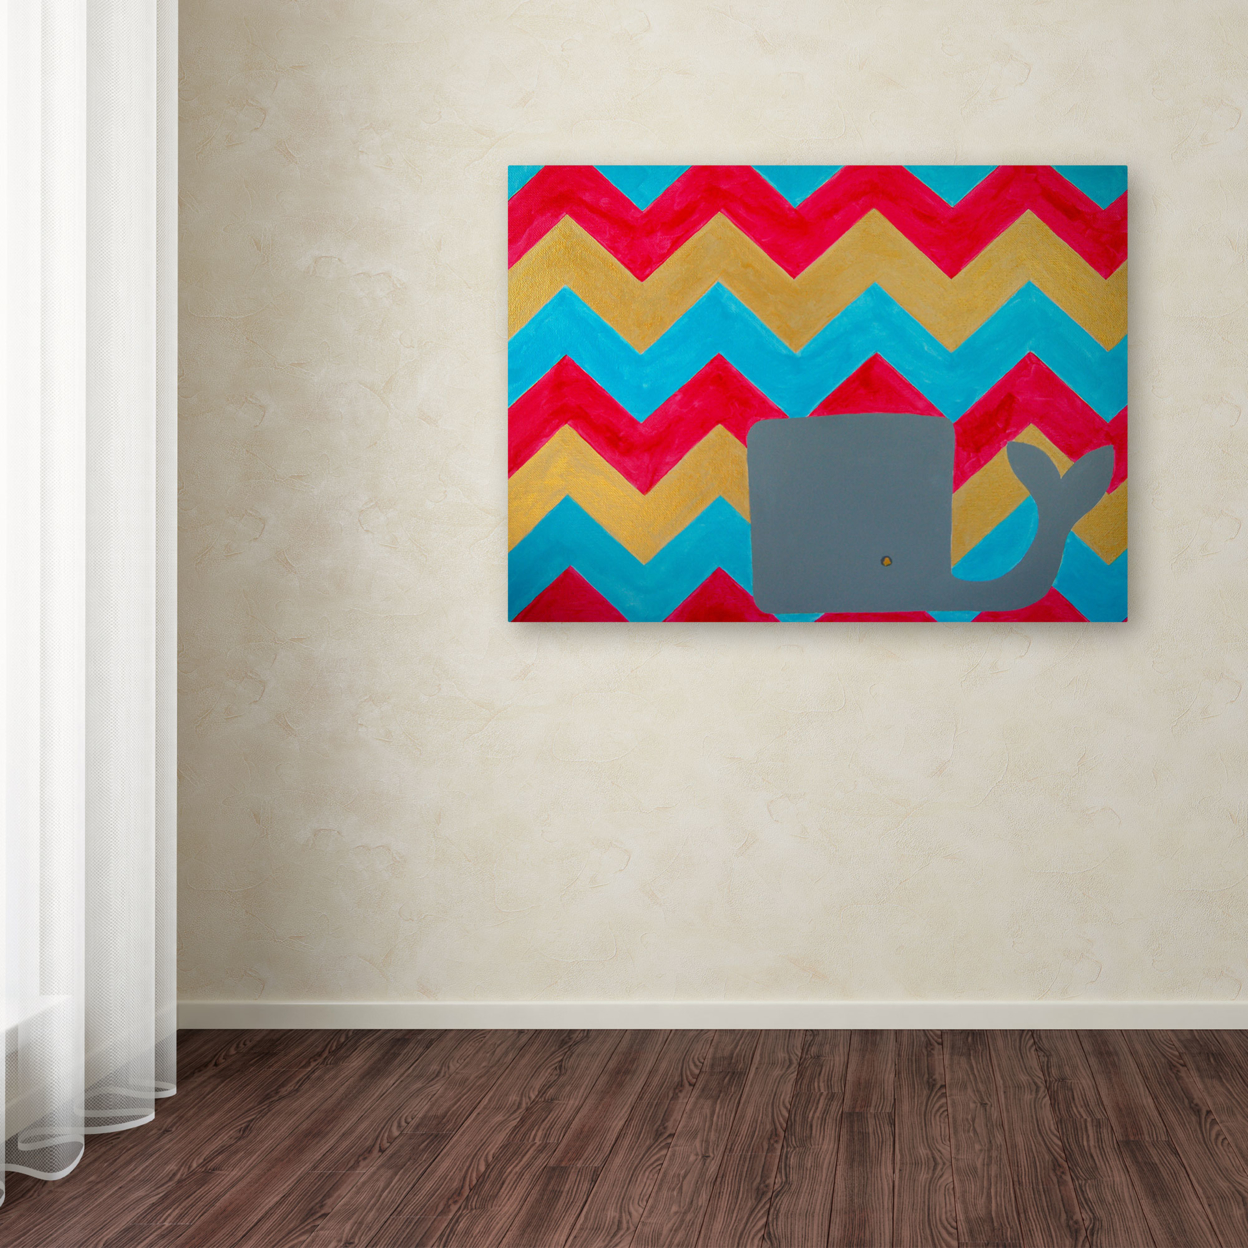 Nicole Dietz 'Pink And Gold Whale Chevron' Canvas Wall Art 35 X 47 Inches